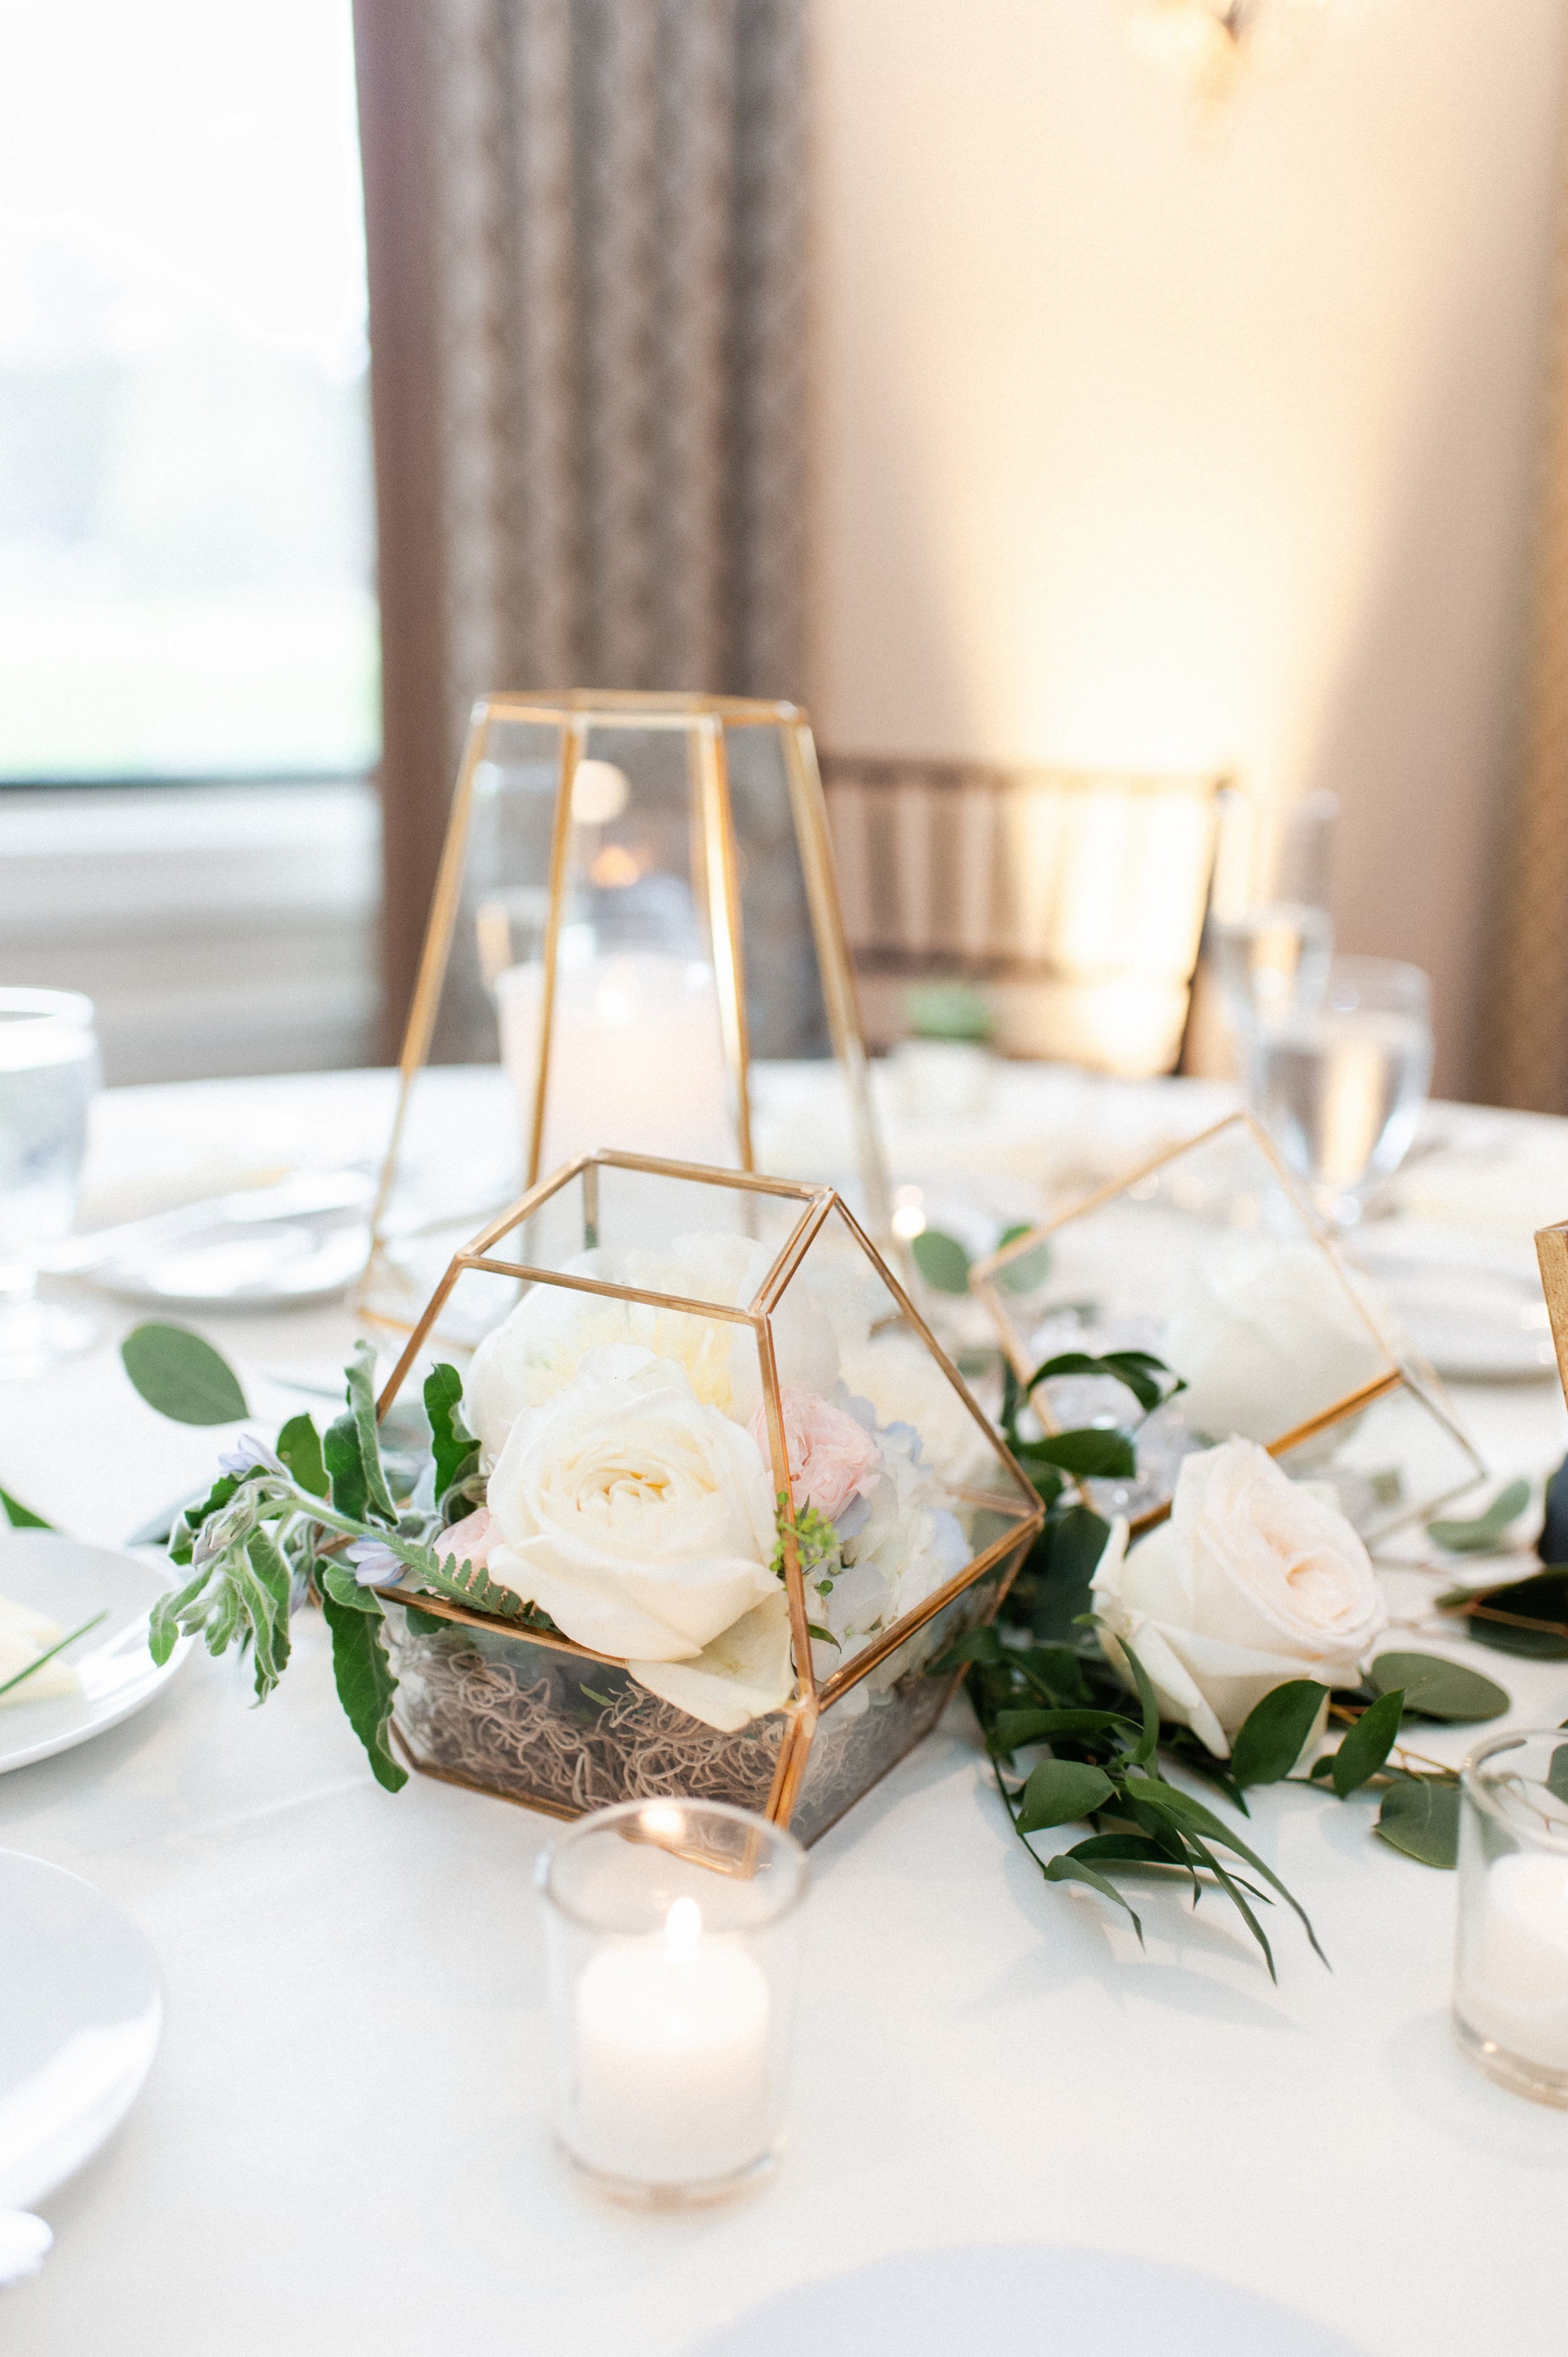 The Villa at Ridder Country Club Spring Wedding | geometric glass centerpieces with flowers | reception inspiration